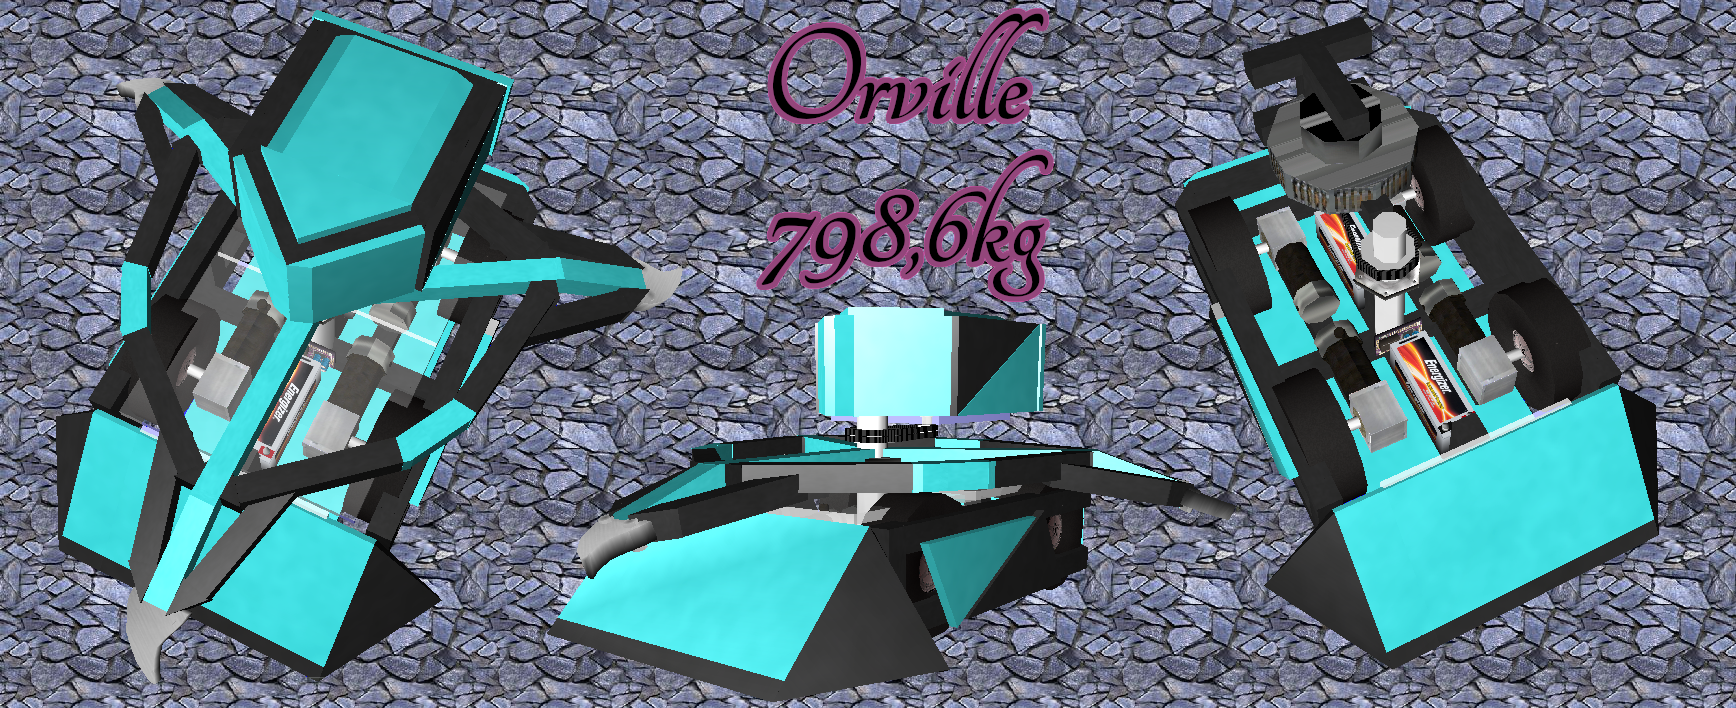 orville.png